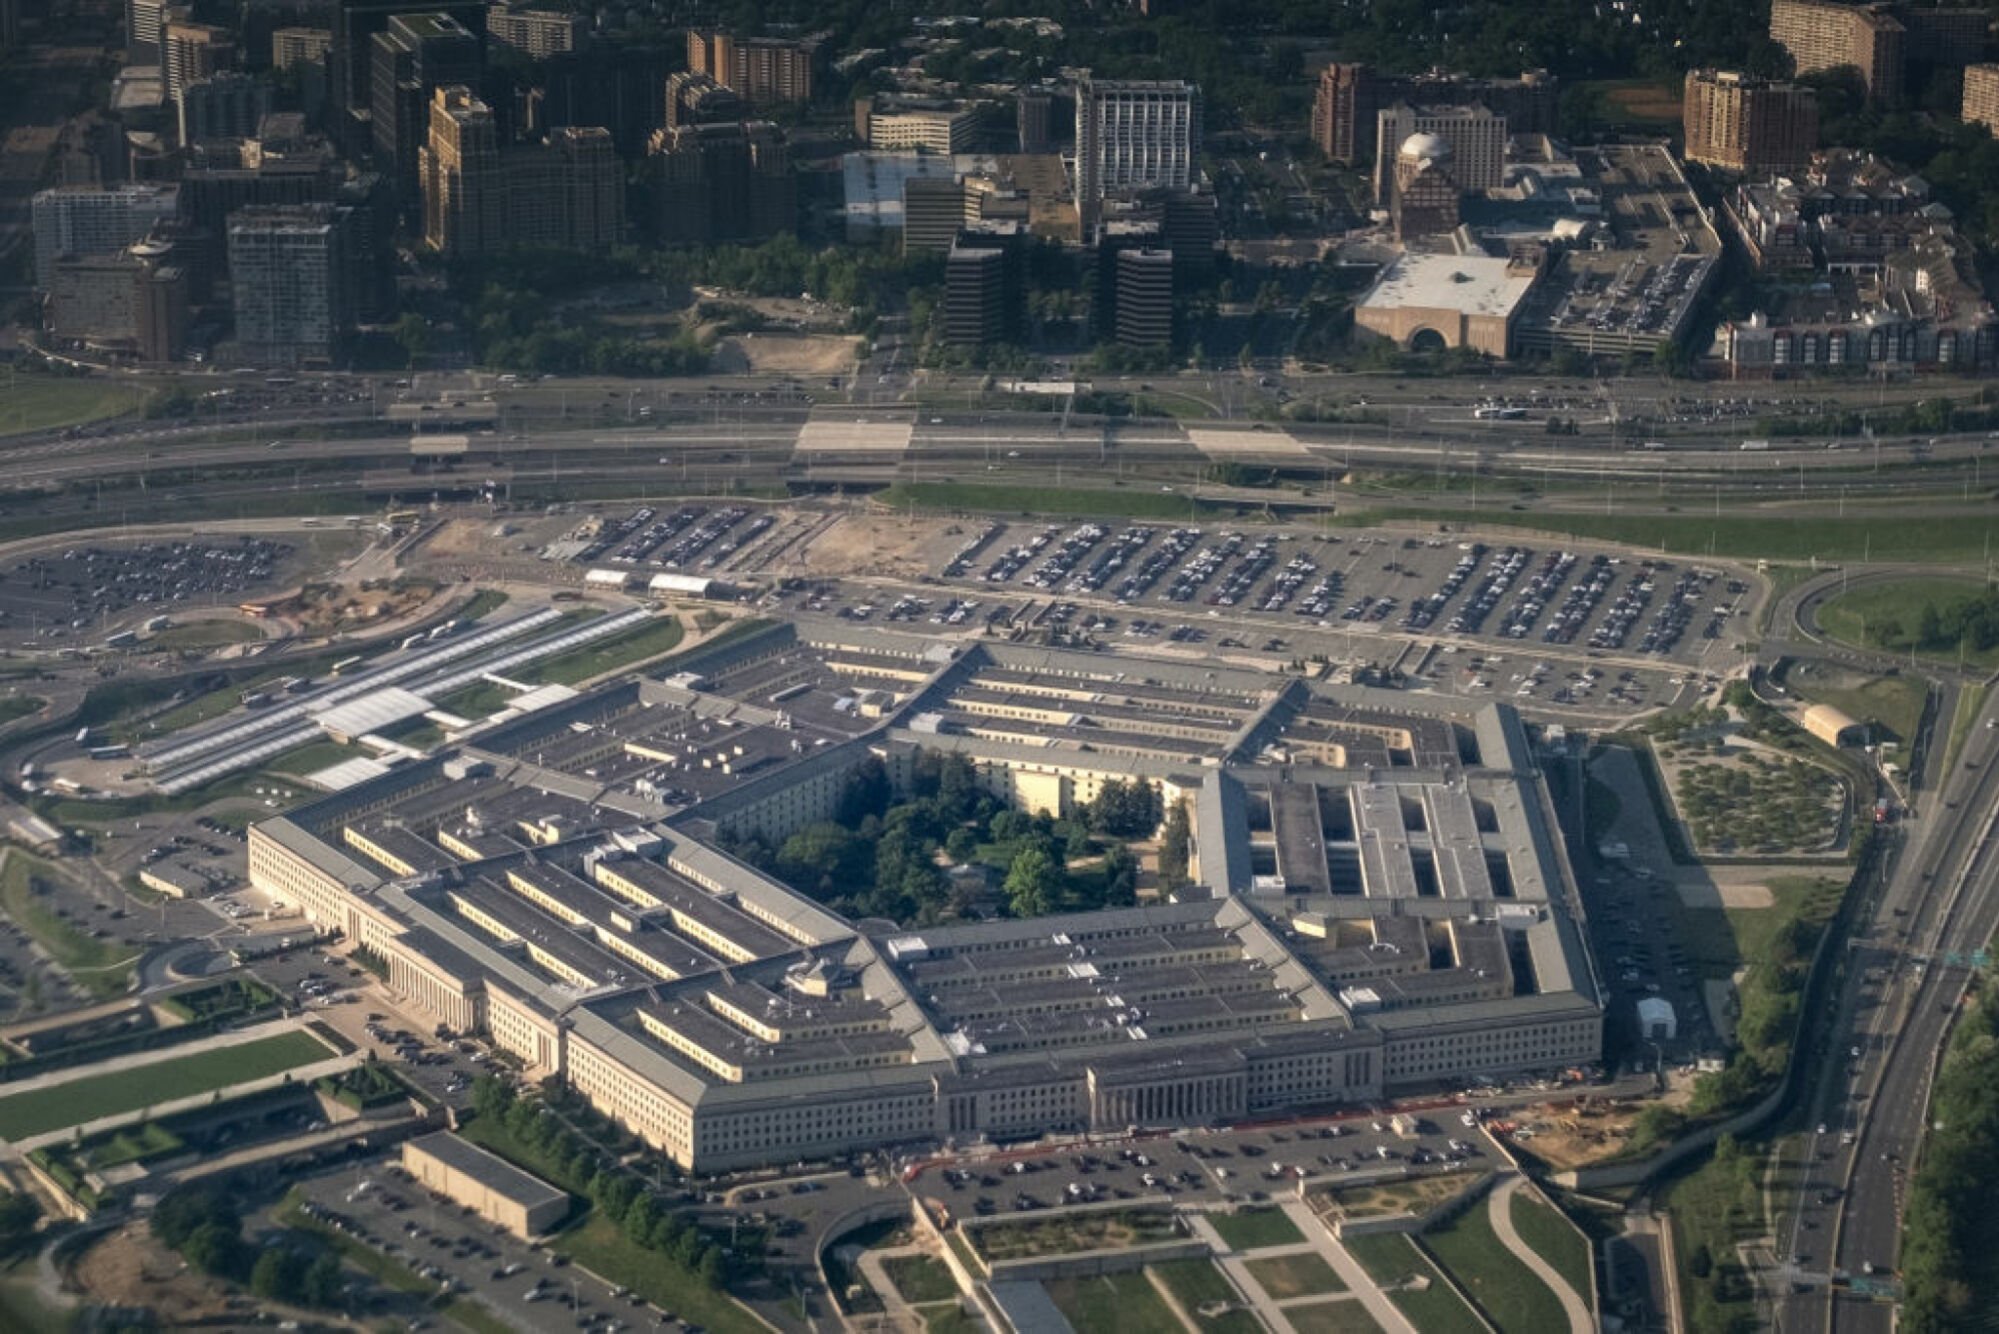 9 intriguing UFO claims the Pentagon just refuted as bogus